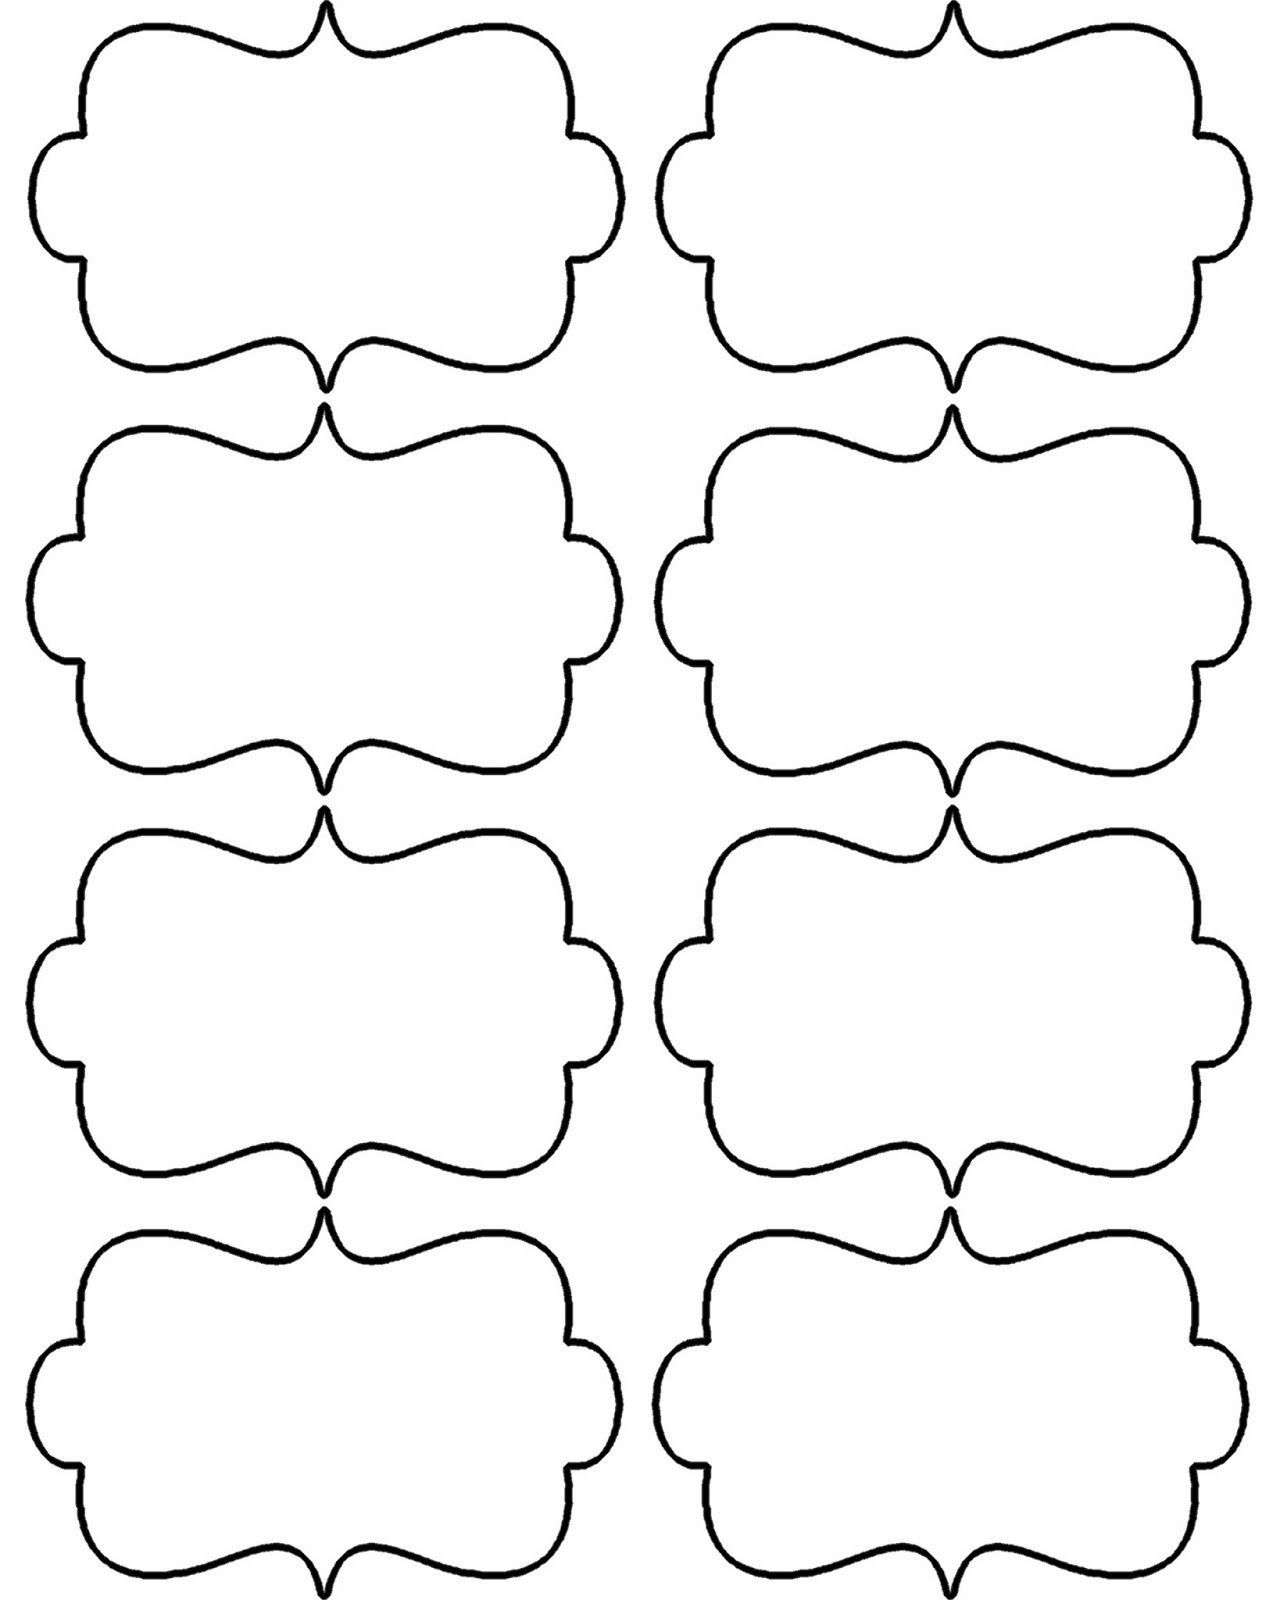 Blank Christmas Shapes Templates - Bing Images | Patterns - Fancy Labels Printable Free